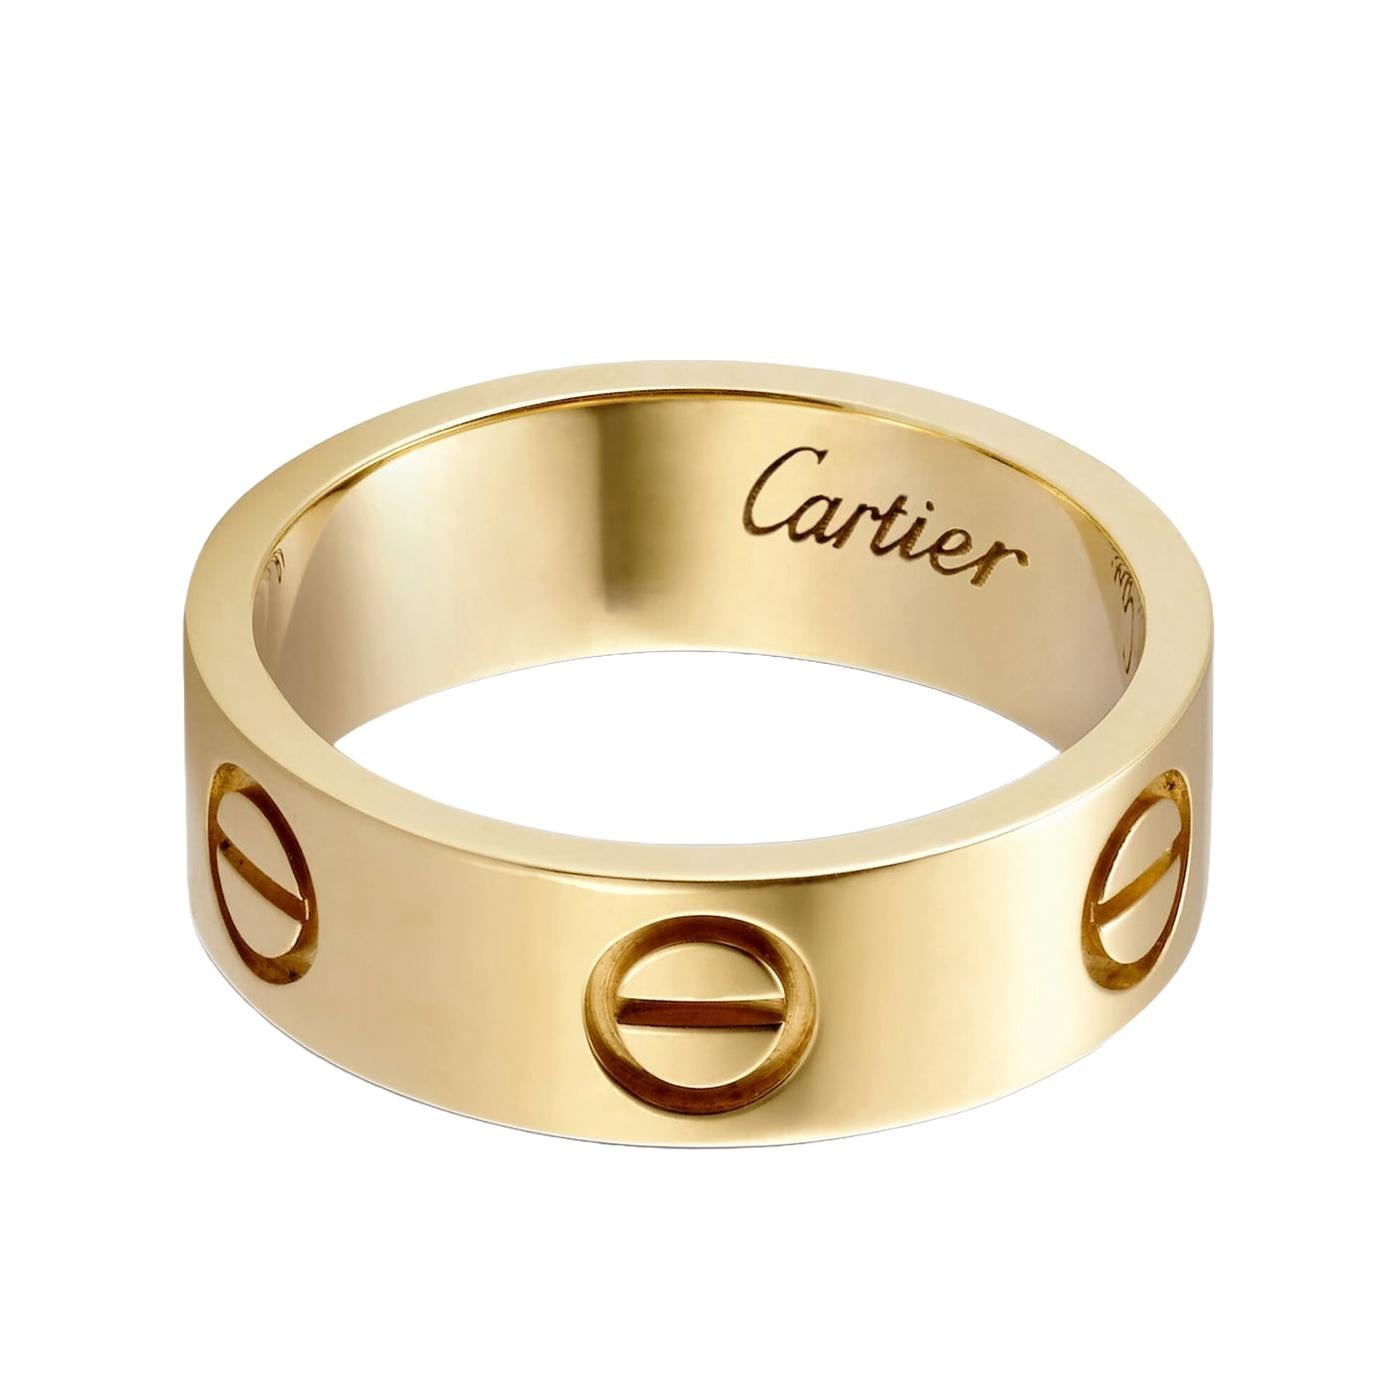 Cartier LOVE Ring, Yellow Gold (750/1000). Width: 5.5 mm (for size 55).

Details:
Brand: Cartier
Style: Love Ring
Material: Yellow Gold
Cartier Size: 55
Theme: Romantic, Love
Scope of Delivery: Box and Papers
Purchased: 2022

Occasion: Anniversary,